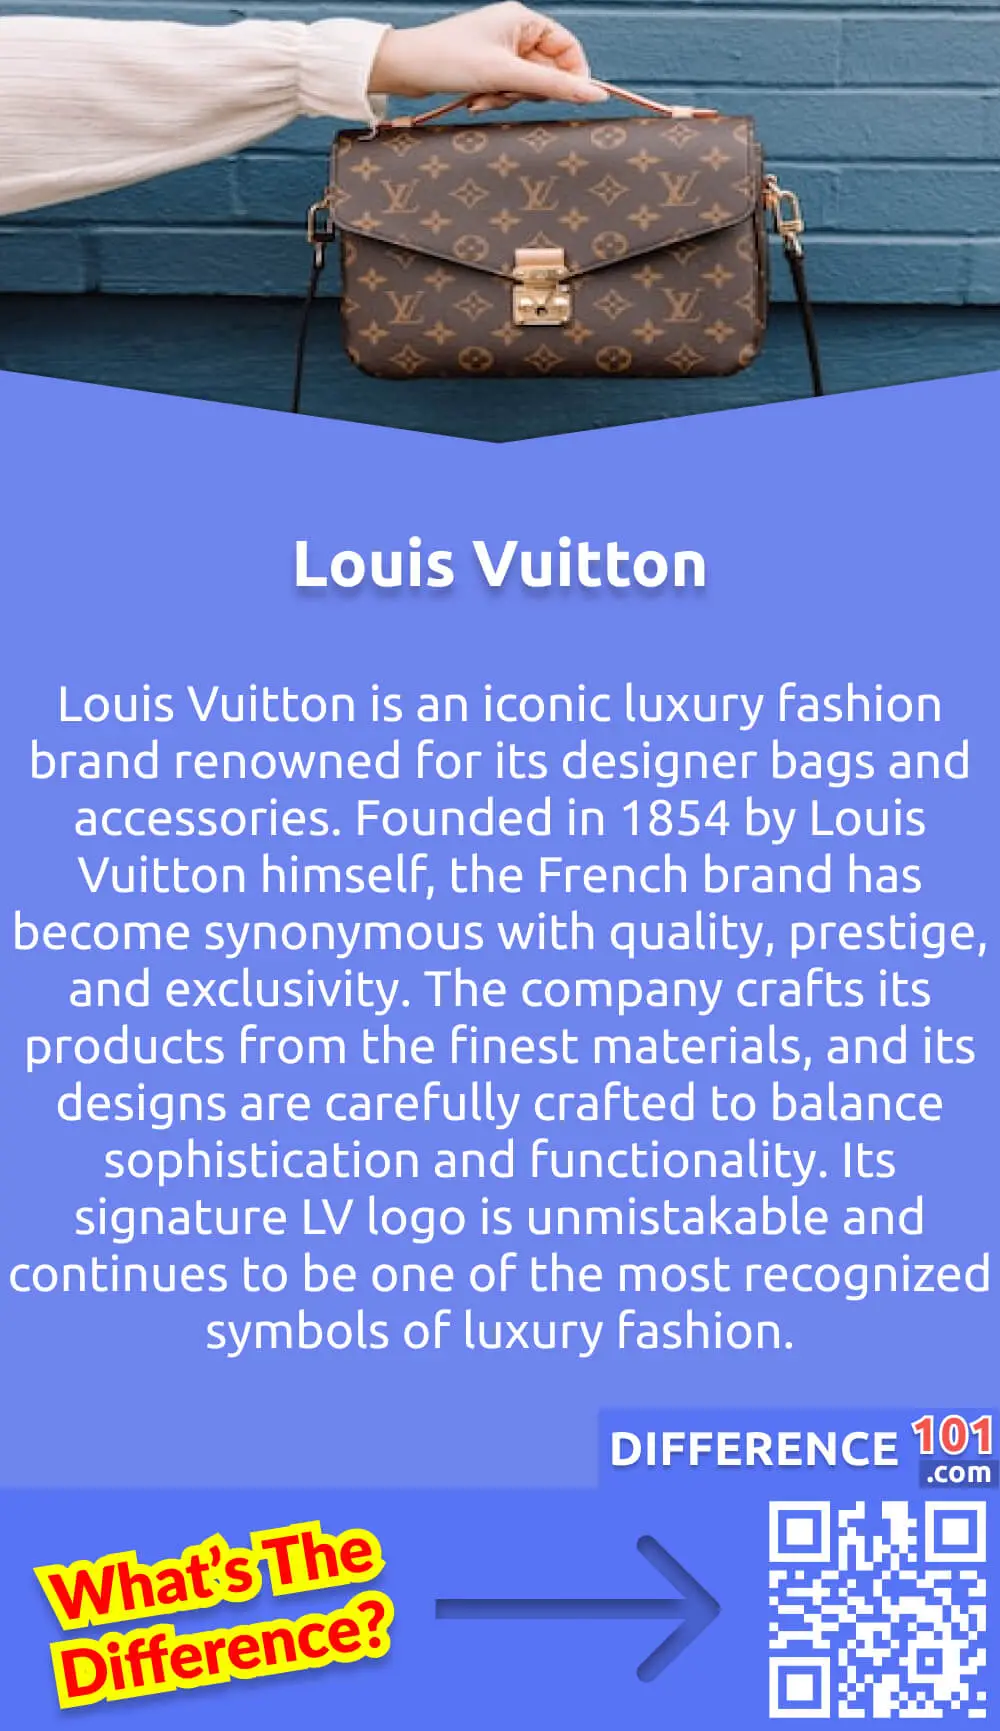 What Is Louis Vuitton? Louis Vuitton is an iconic luxury fashion brand renowned for its designer bags and accessories. Founded in 1854 by Louis Vuitton himself, the French brand has become synonymous with quality, prestige, and exclusivity. The company crafts its products from the finest materials, and its designs are carefully crafted to balance sophistication and functionality. Louis Vuitton has a worldwide reputation for its exquisite craftsmanship, attention to detail, and innovation, which makes it a popular choice among wealthy and fashionable individuals. Its signature LV logo is unmistakable and continues to be one of the most recognized symbols of luxury fashion.